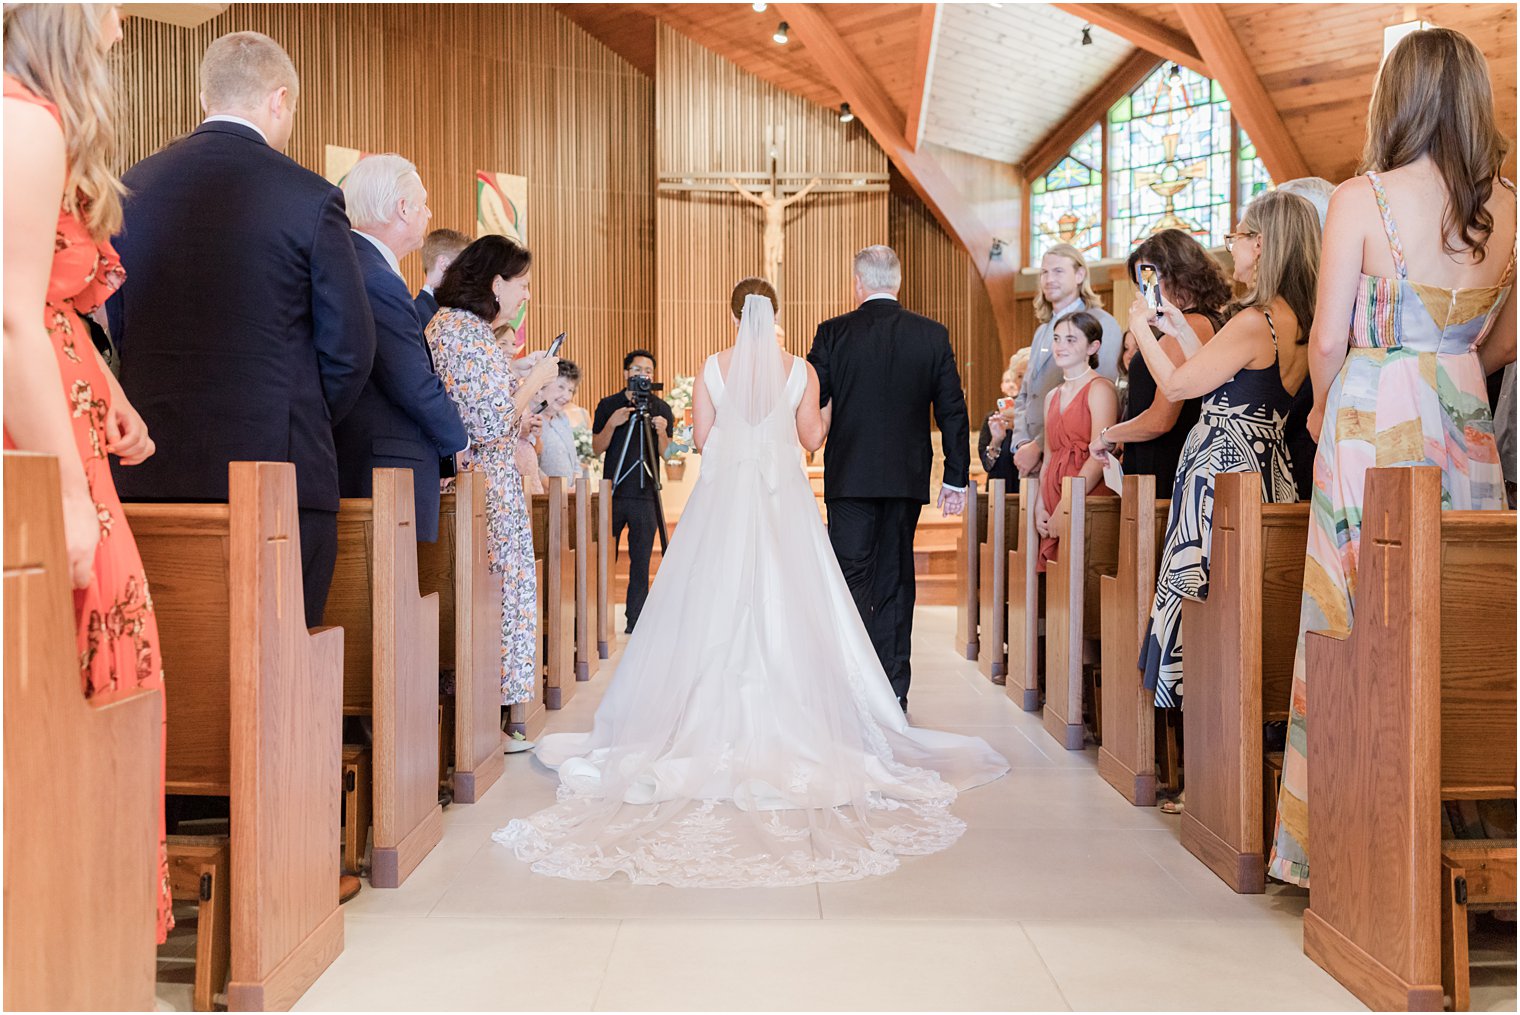 bride walks down aisle for traditional wedding ceremony at the Church of the Presentation